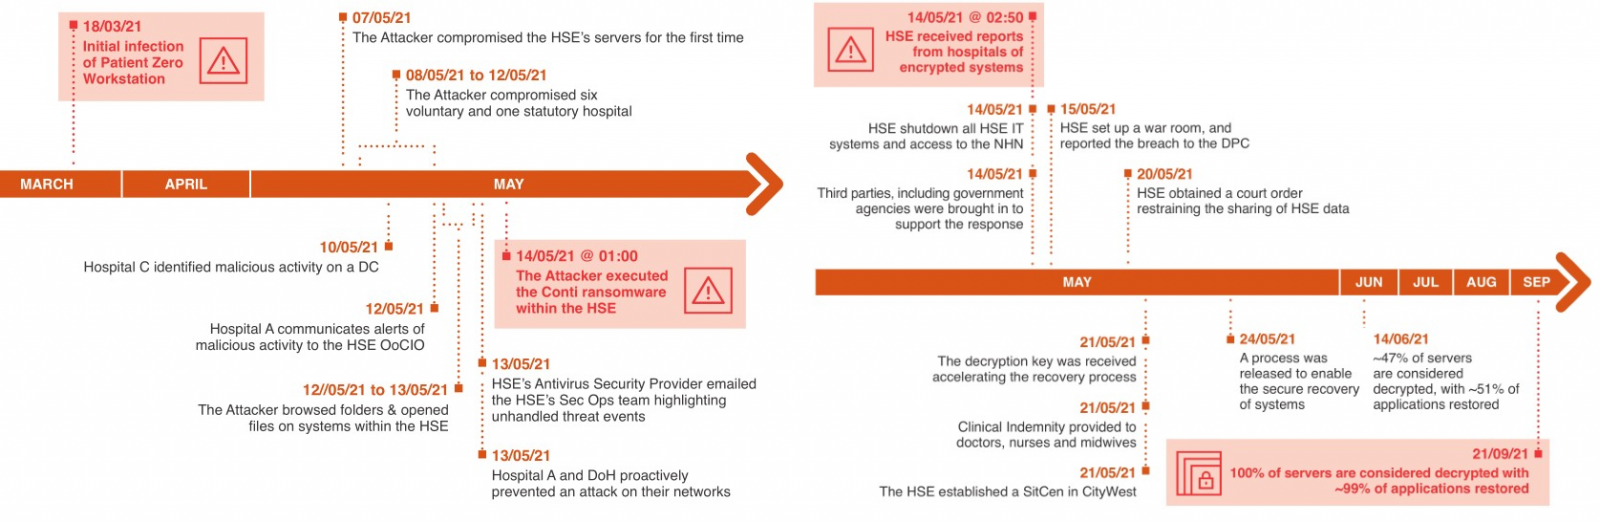 HSE Conti ransomware incident timeline